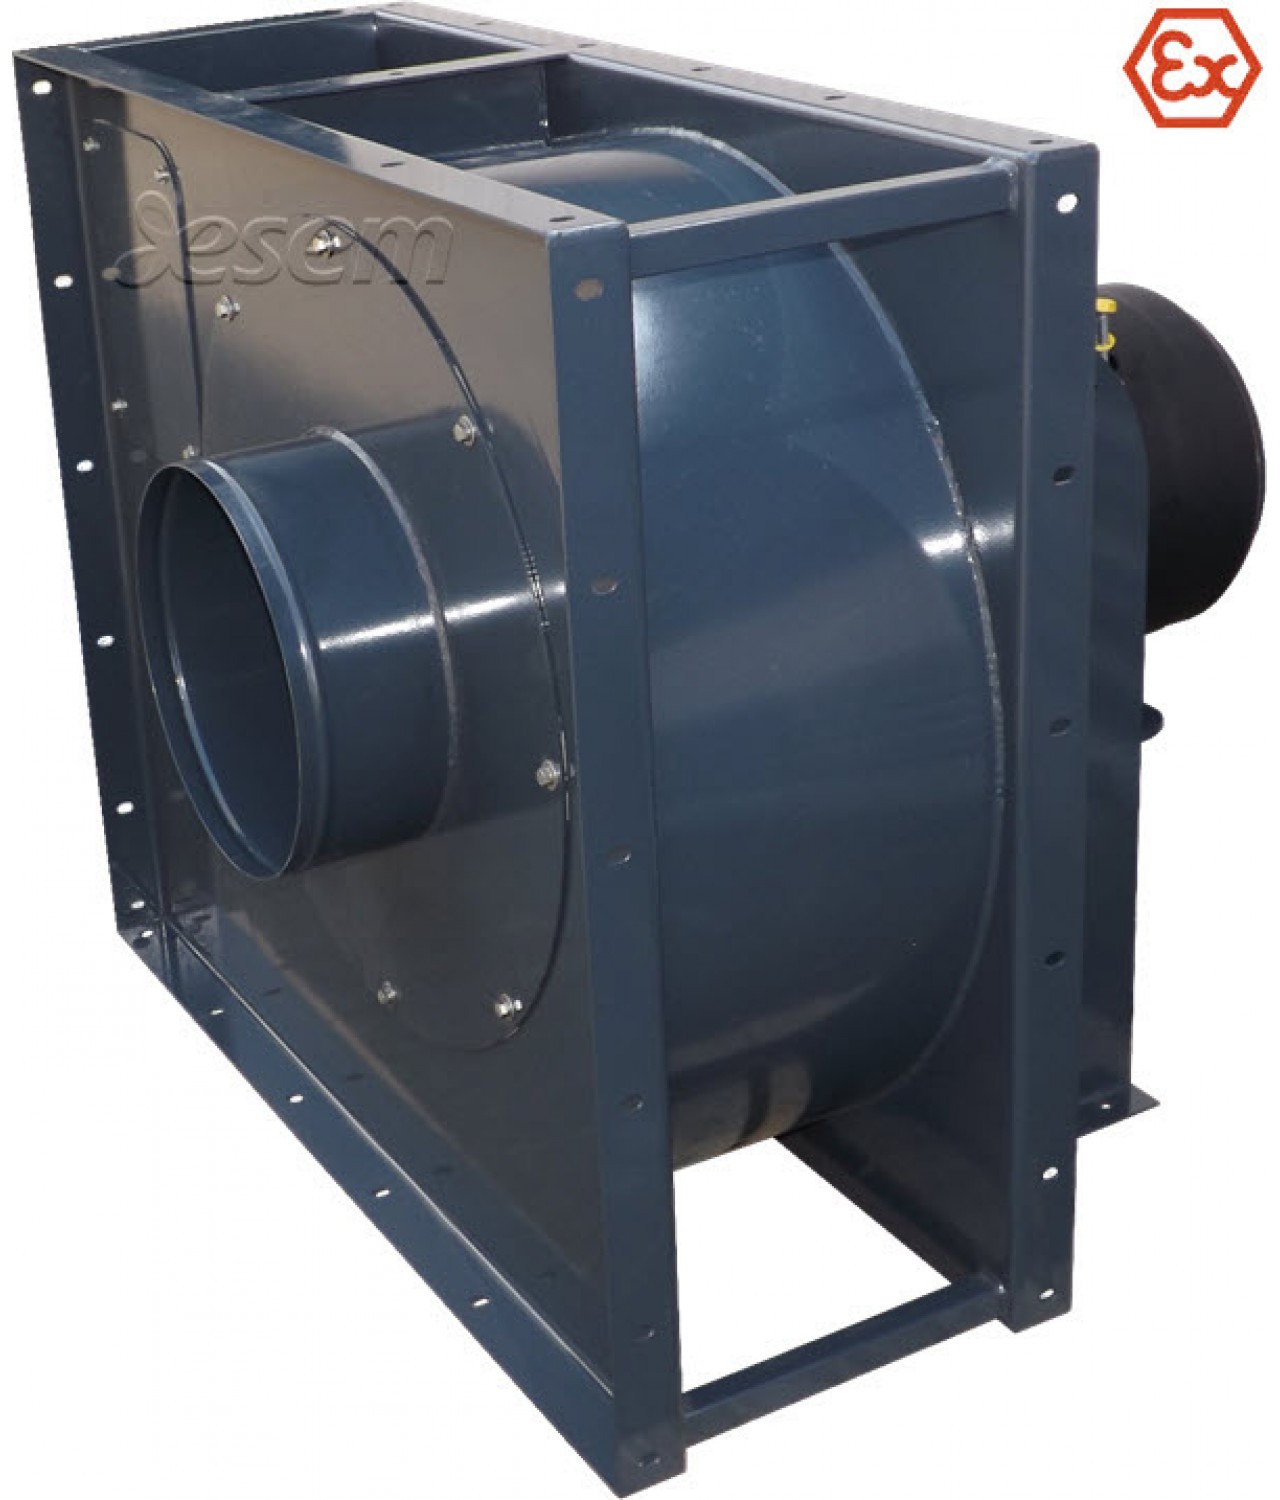 Explosion proof dust extraction fans IVWTK EX ≤20000 m³/h